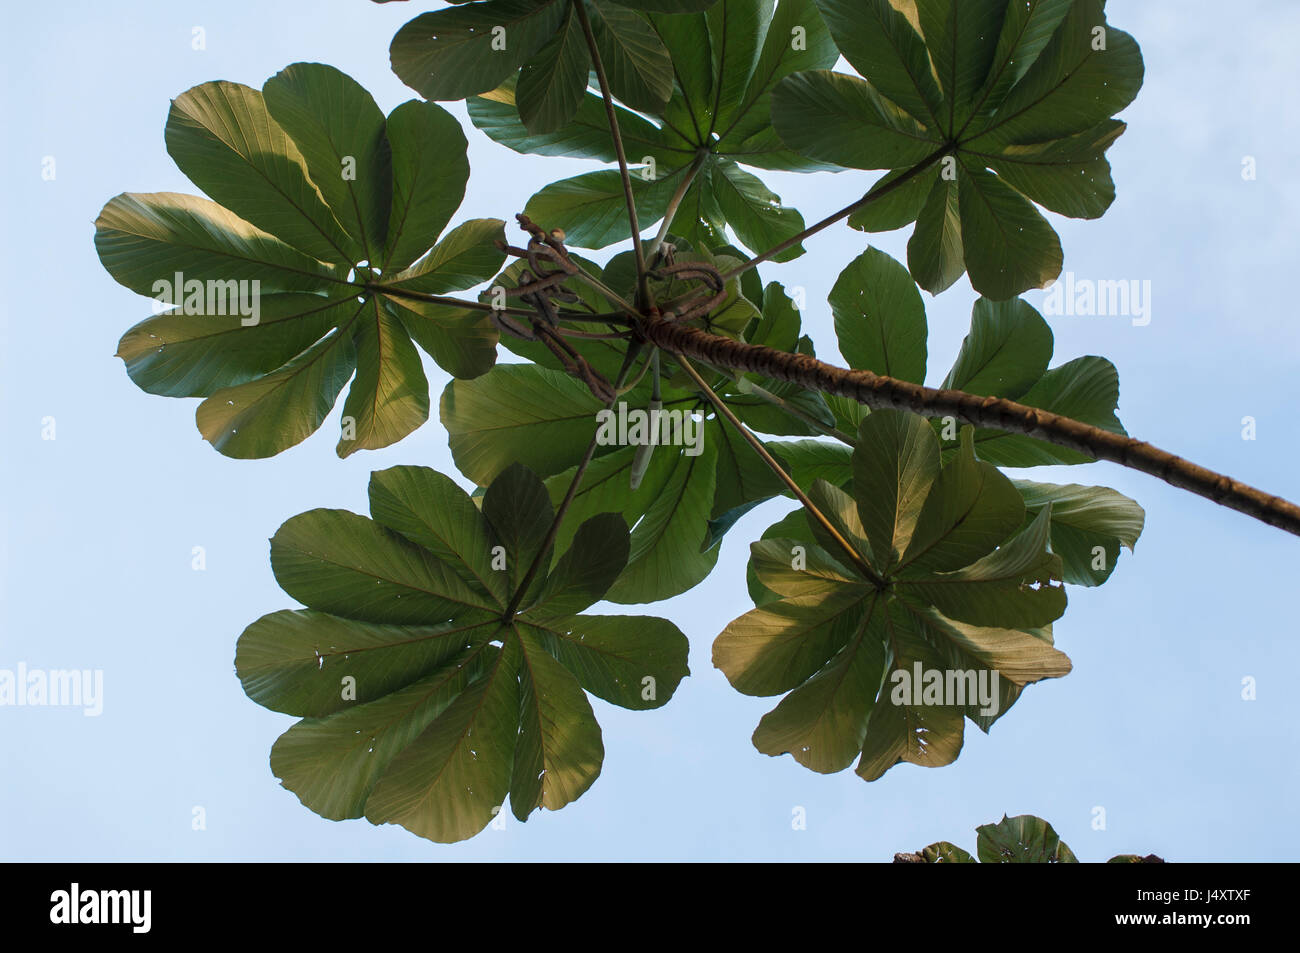 Leaves on the end of a branch of Cecropia peltata in the Atlantic Rainforest, Parana Brazil Stock Photo